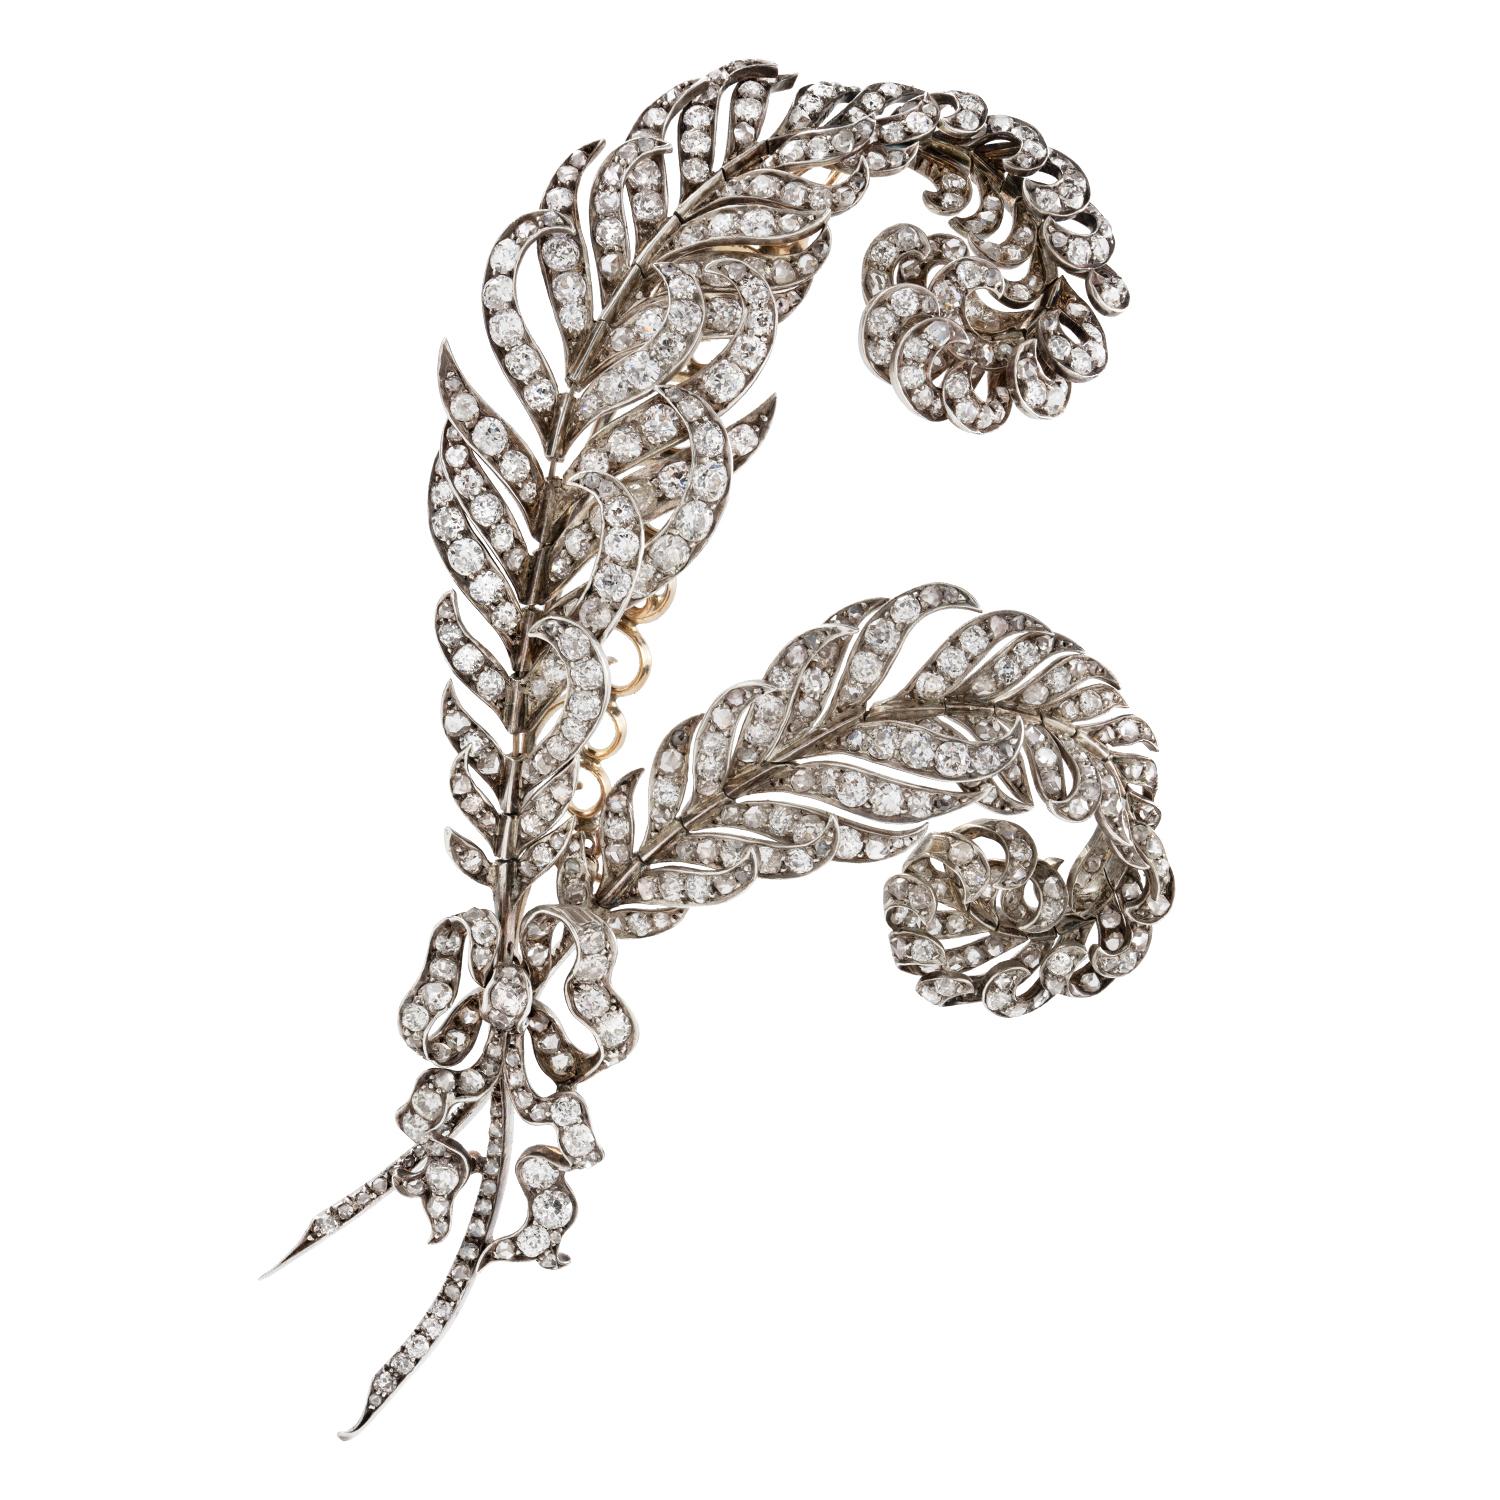 A Victorian diamond-set feather brooch, the two realistically carved feathers encrusted with old European-cut diamonds, tied with an old-cut diamond-set ribbon, the diamonds weighing approximately a total of 20 carats, all set in silver to yellow